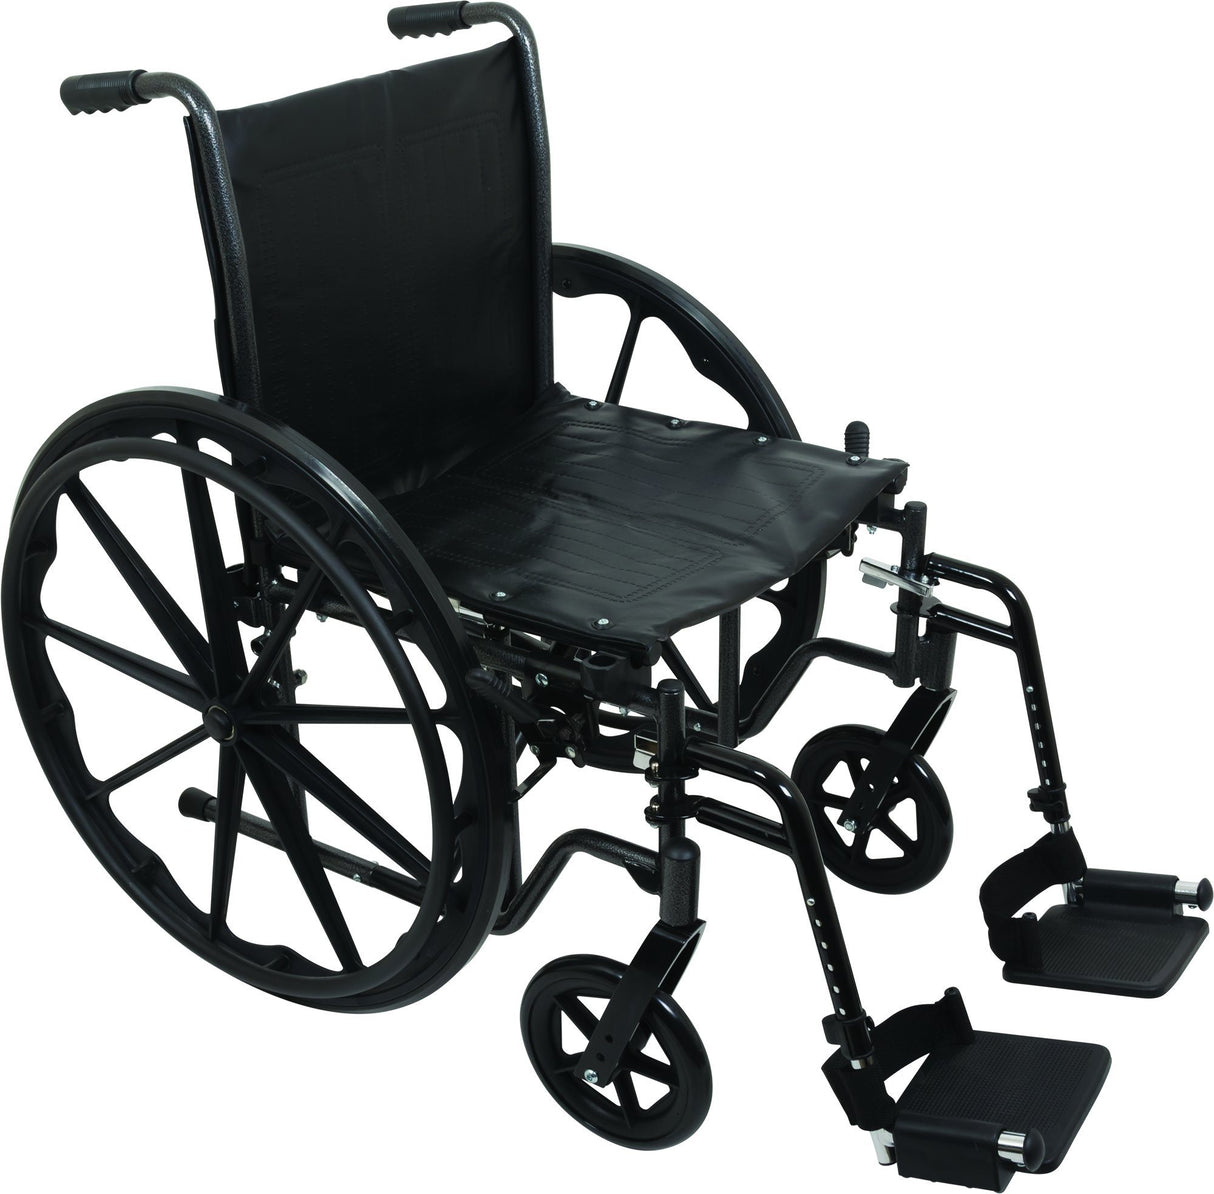 Image of ProBasics K2 Wheelchair with 20" x 16" Seat and Elevating Legrests